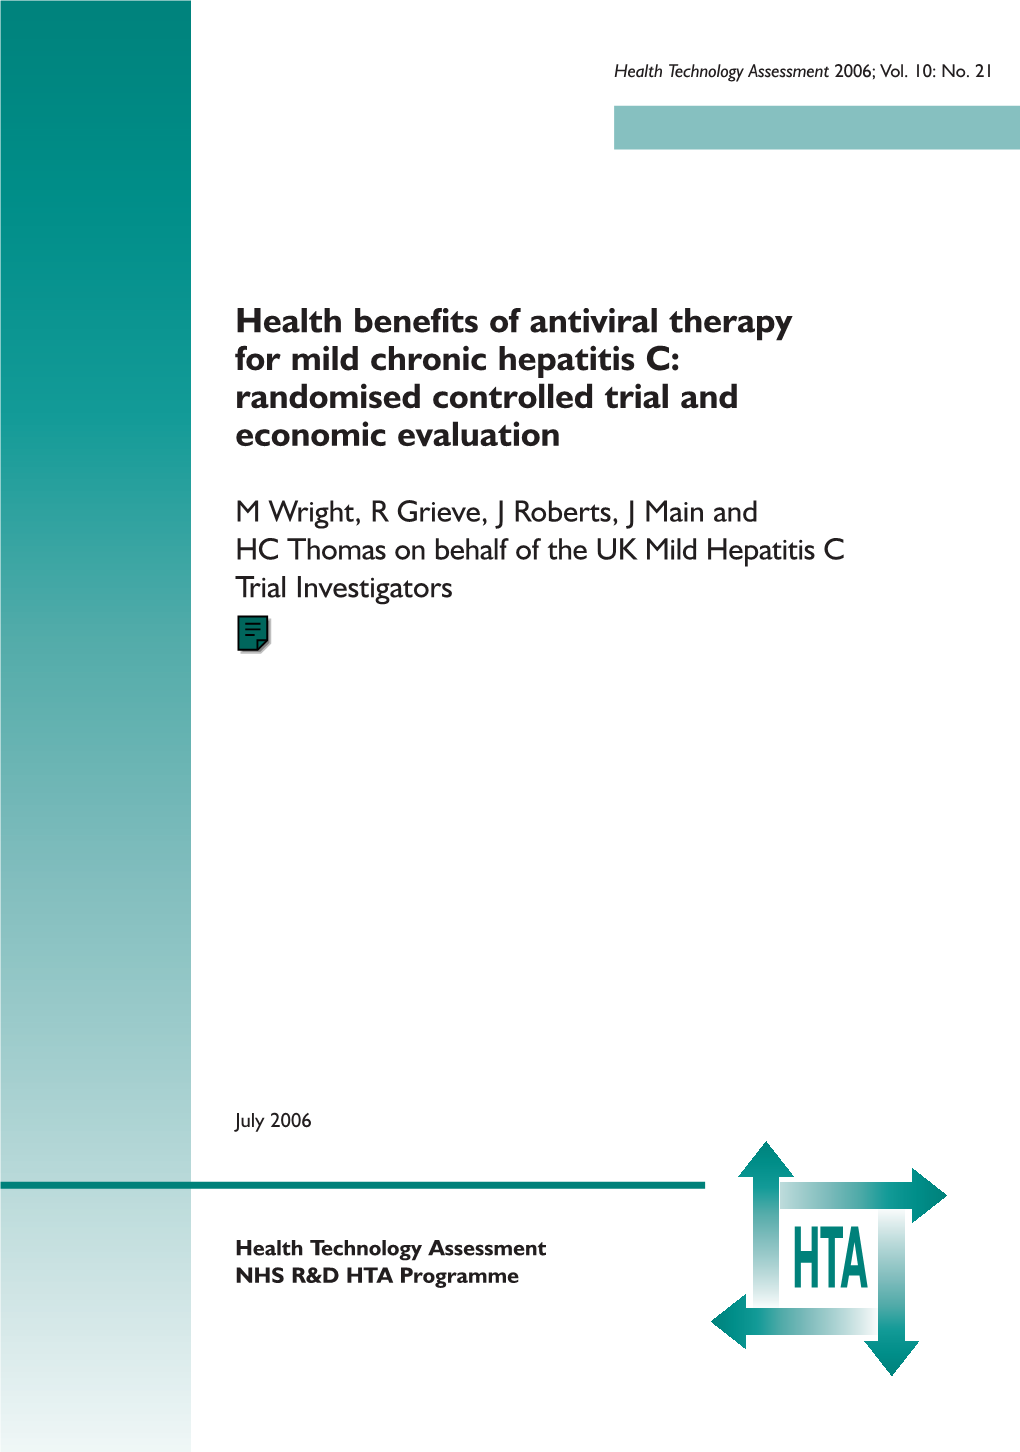 Health Benefits of Antiviral Therapy for Mild Chronic Hepatitis C: Randomised Controlled Trial and Economic Evaluation